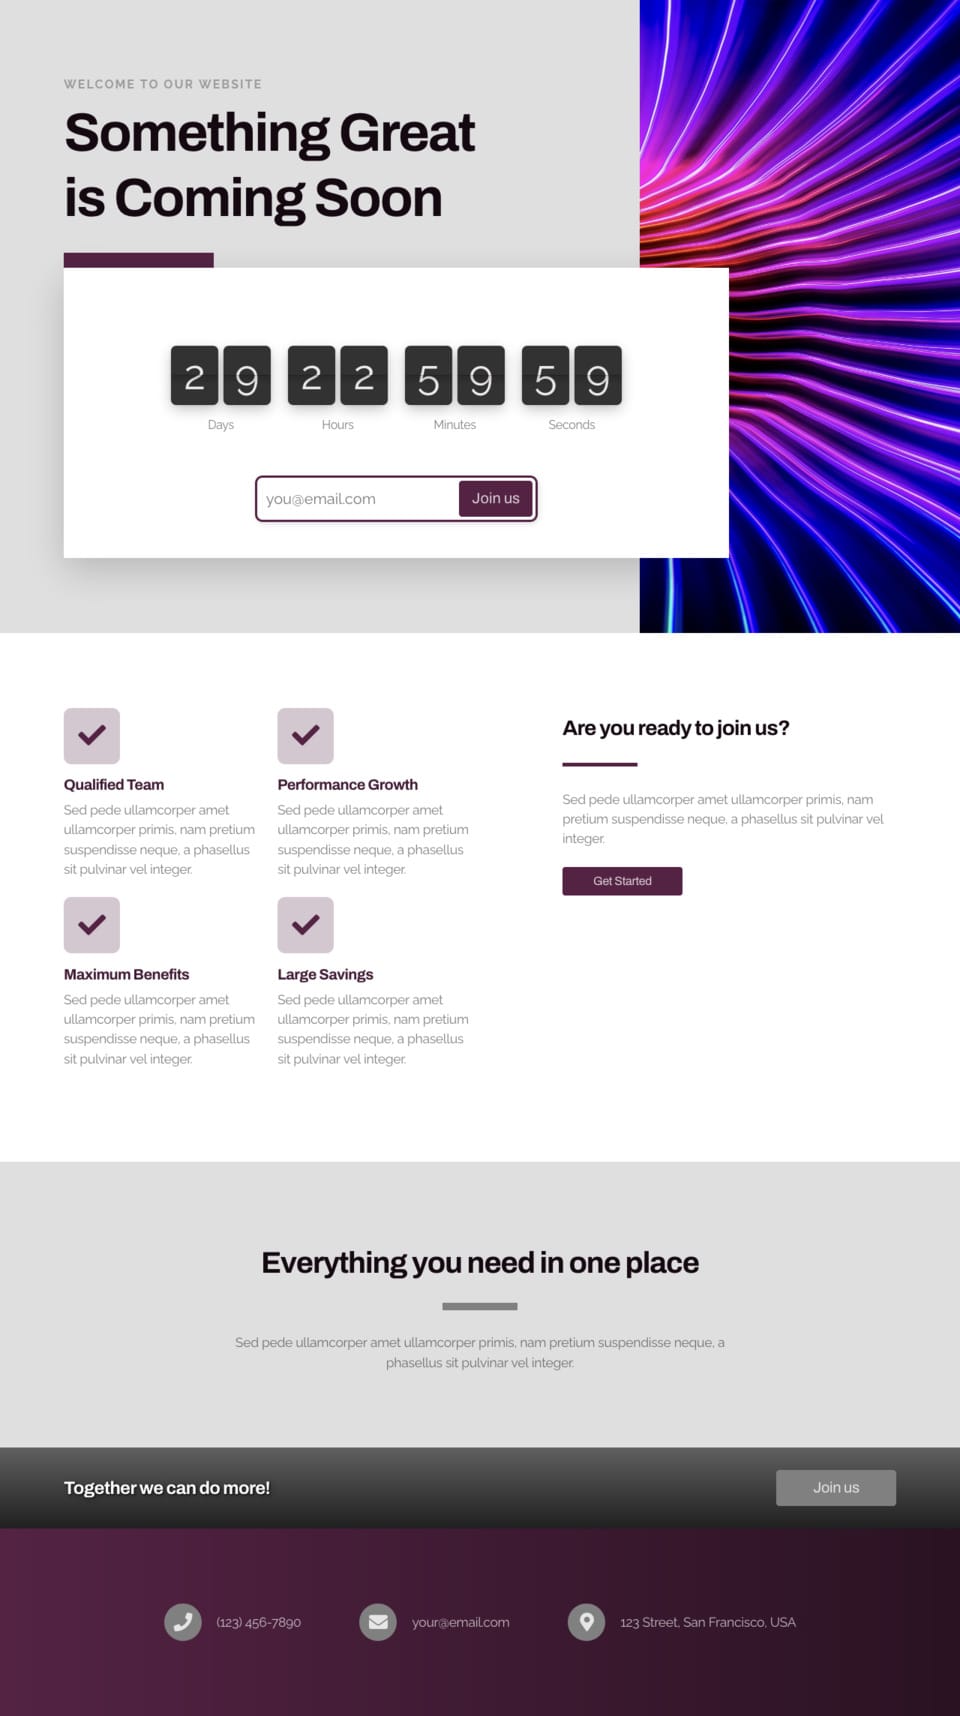 Coming Soon Website Template - Ideal for businesses, bloggers, creatives, and entrepreneurs looking for a quick and easy way to launch a stunning website.